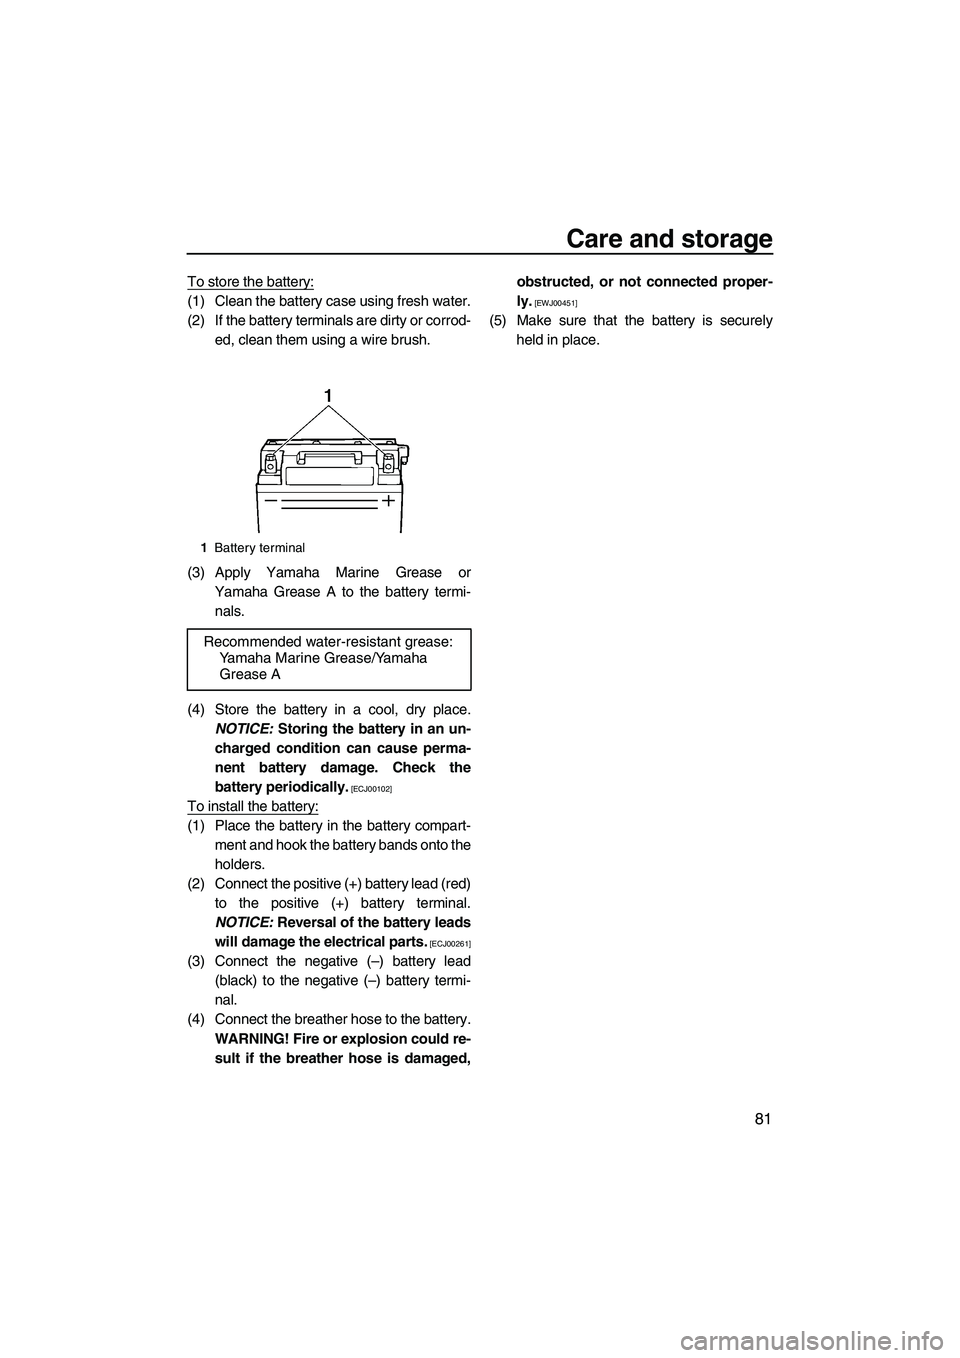 YAMAHA FZS 2013  Owners Manual Care and storage
81
To store the battery:
(1) Clean the battery case using fresh water.
(2) If the battery terminals are dirty or corrod-ed, clean them using a wire brush.
(3) Apply Yamaha Marine Grea